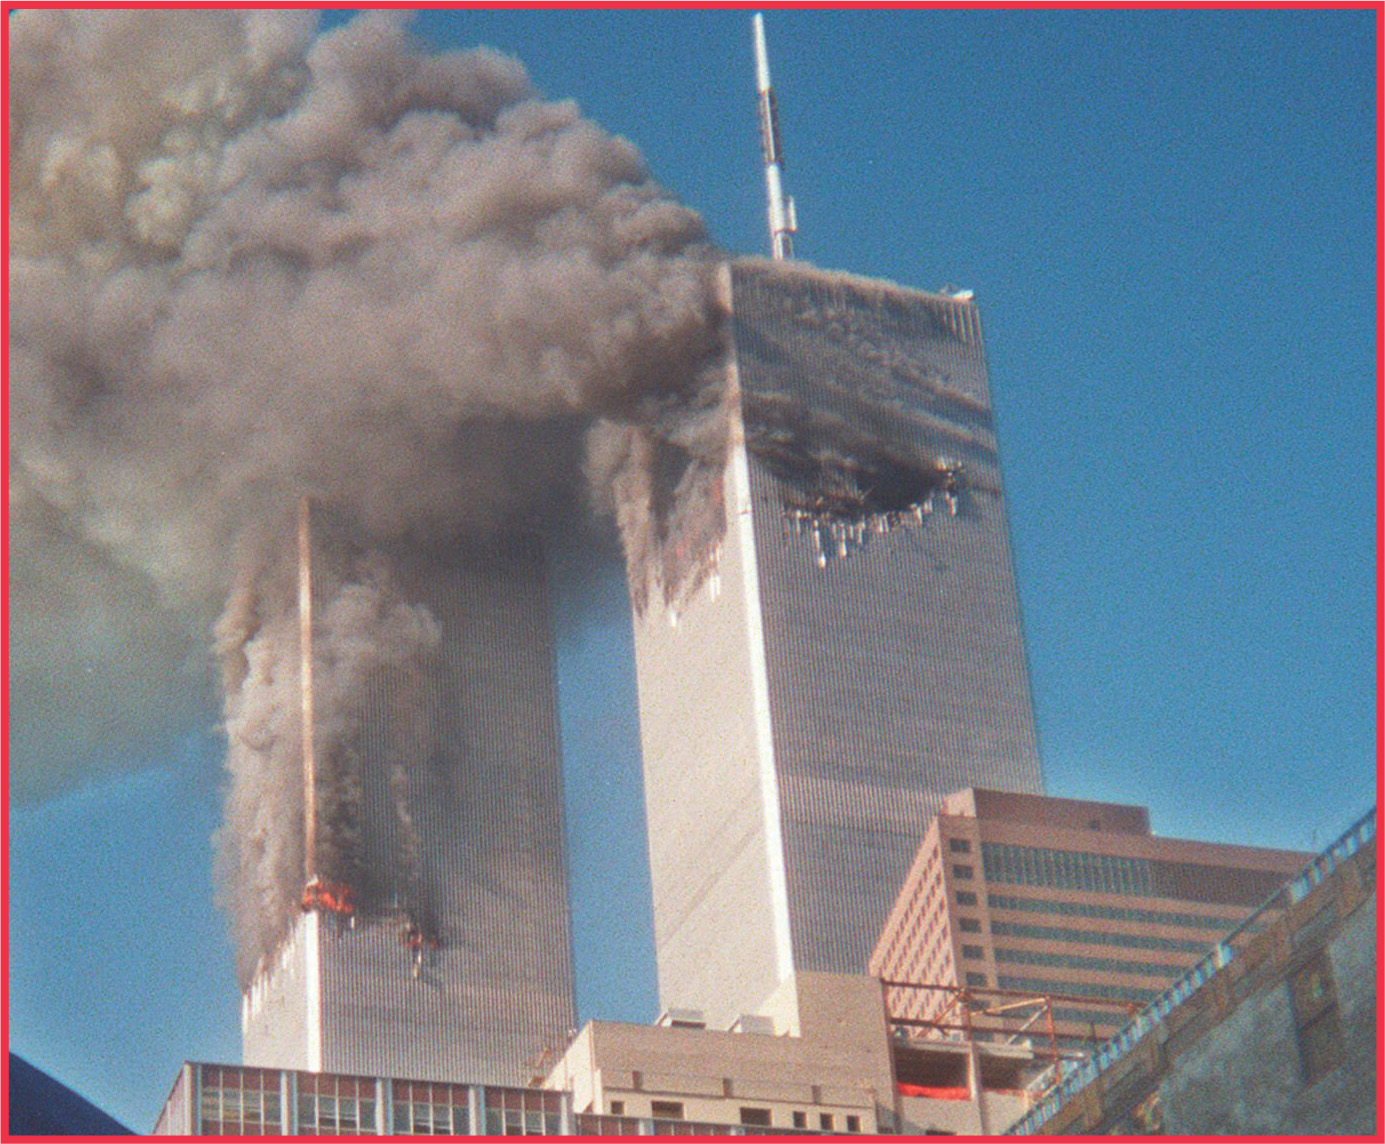 photo: smoke pours out of the damaged the World Trade Center towers.